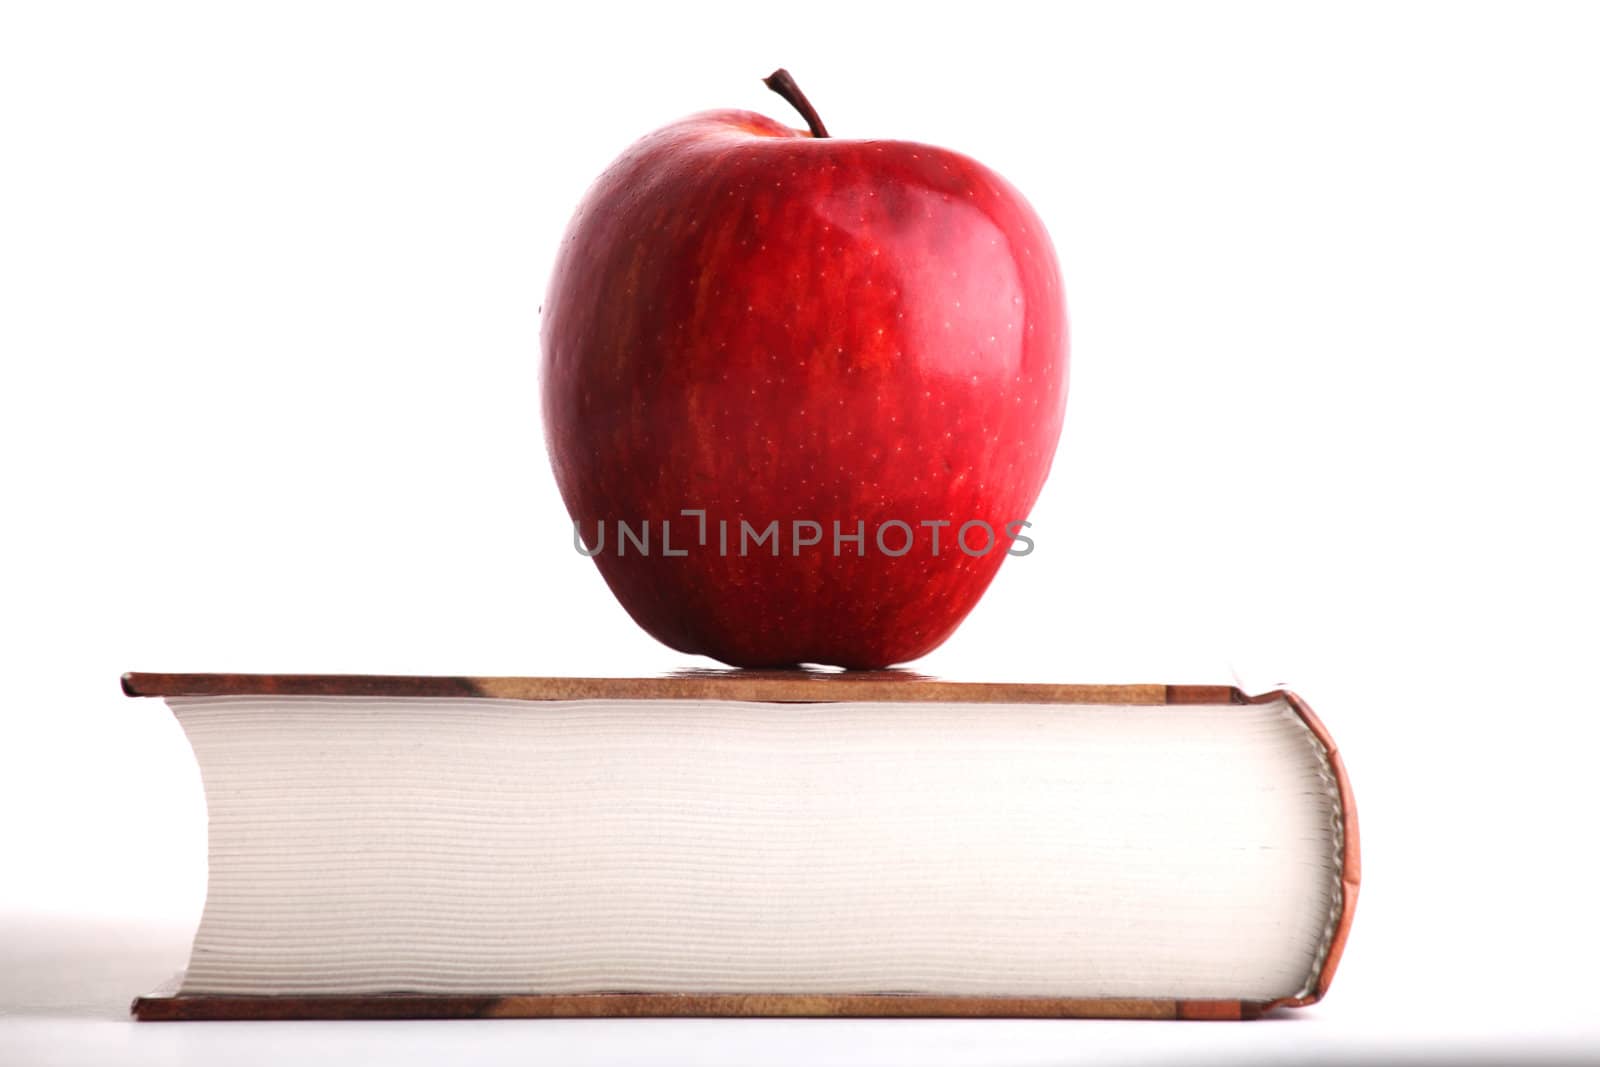 Red apple on the big book on white background